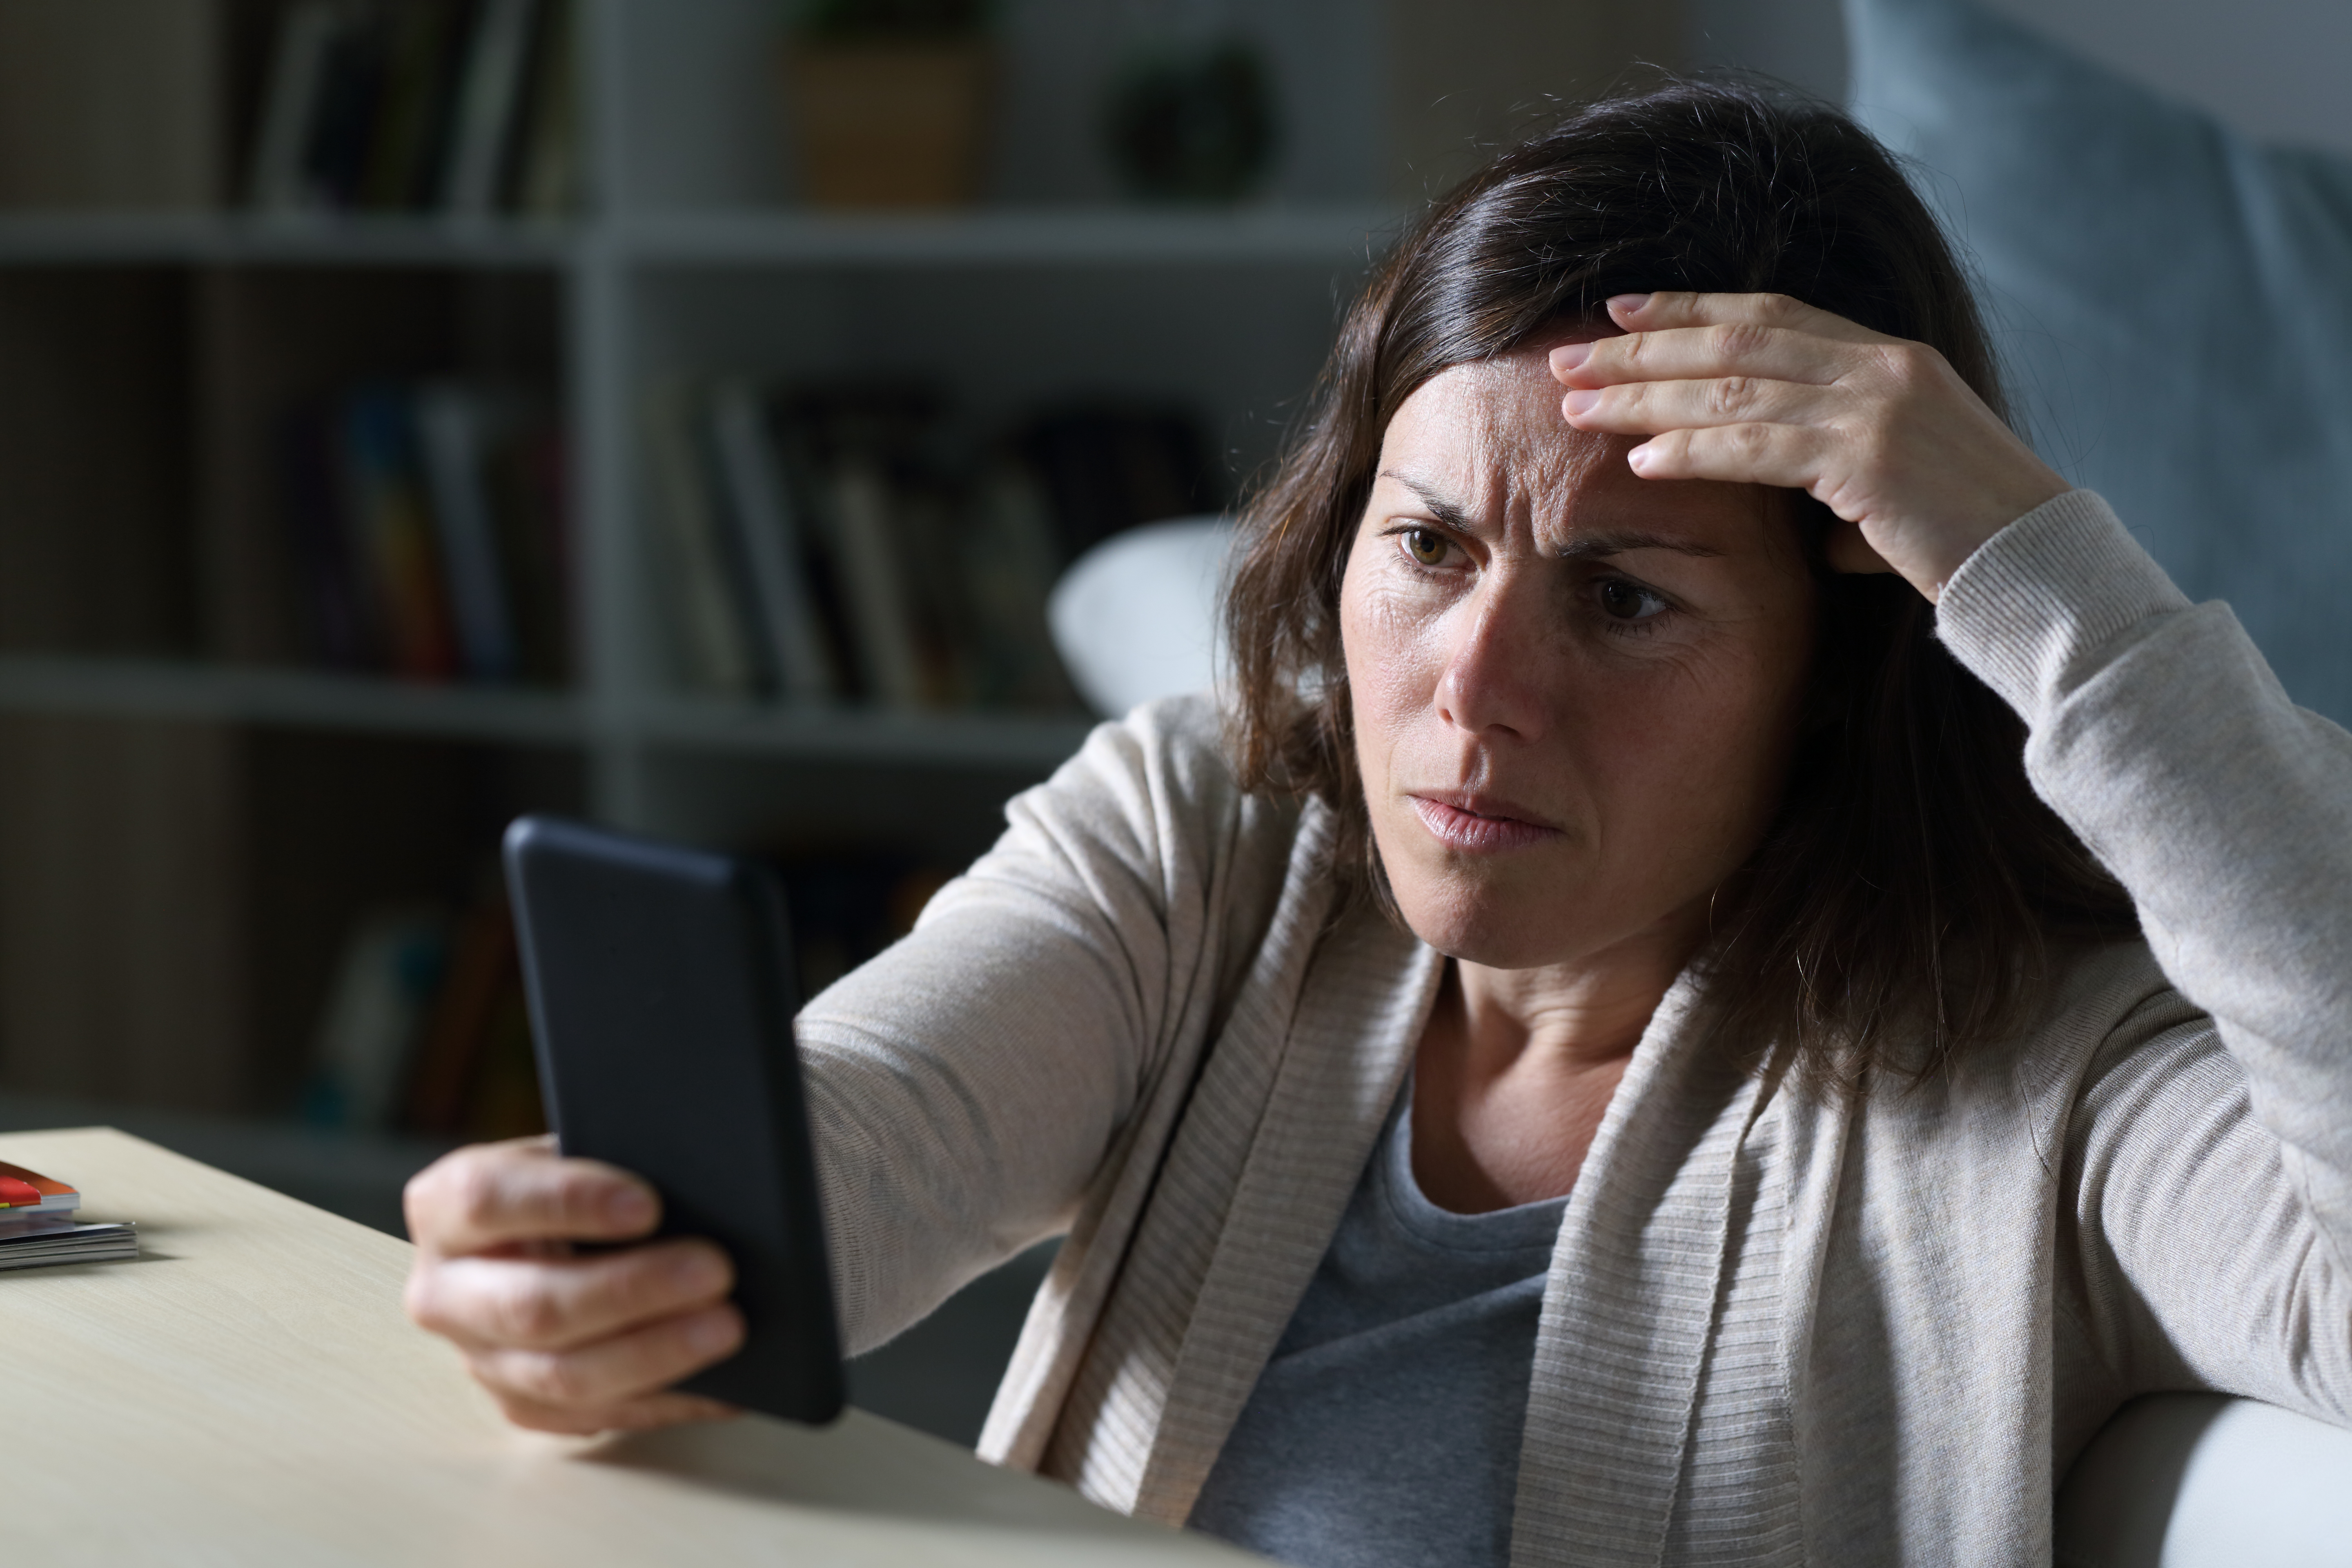 A woman looking worried while starring at a phone | Source: Shutterstock